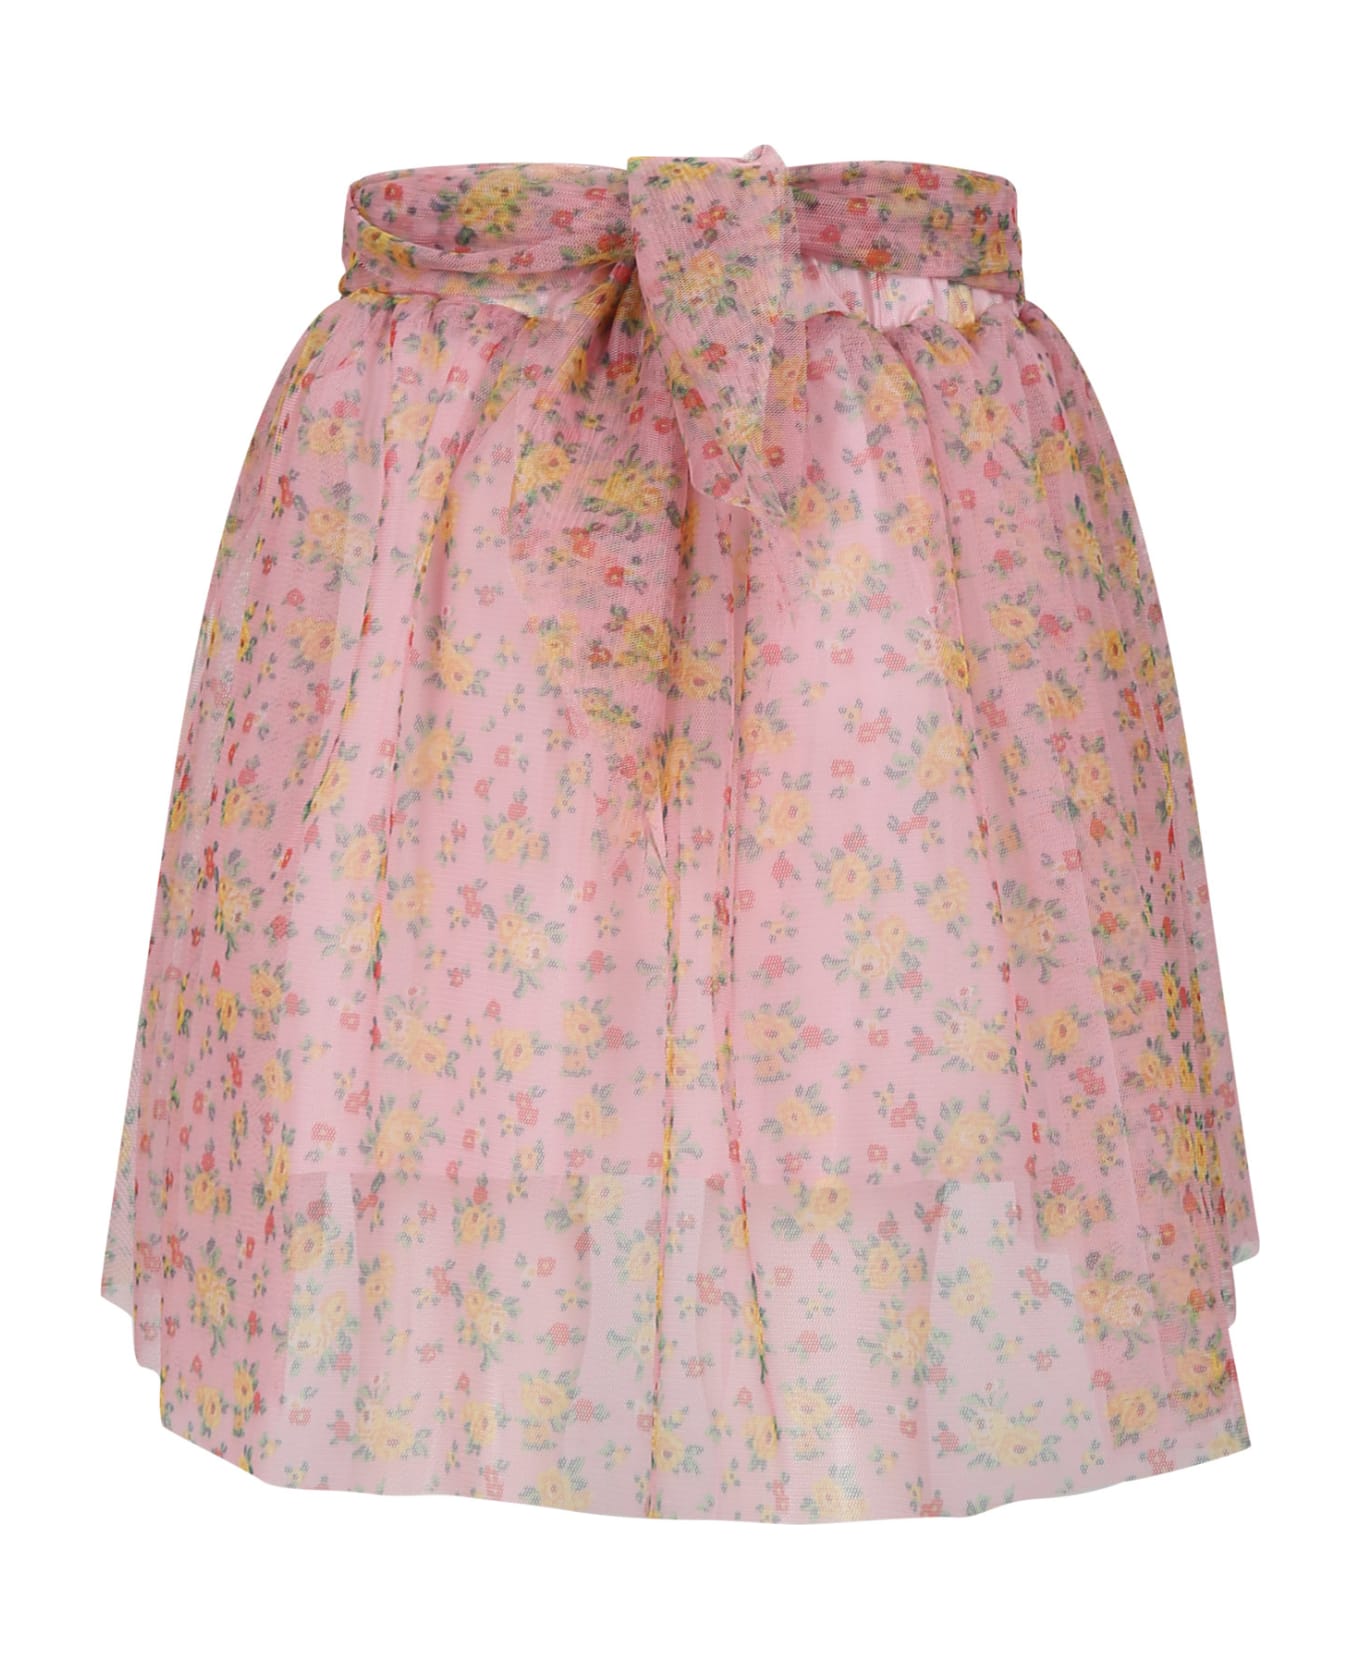 Philosophy di Lorenzo Serafini Kids Pink Skirt For Girl With Floral Print - Multicolor